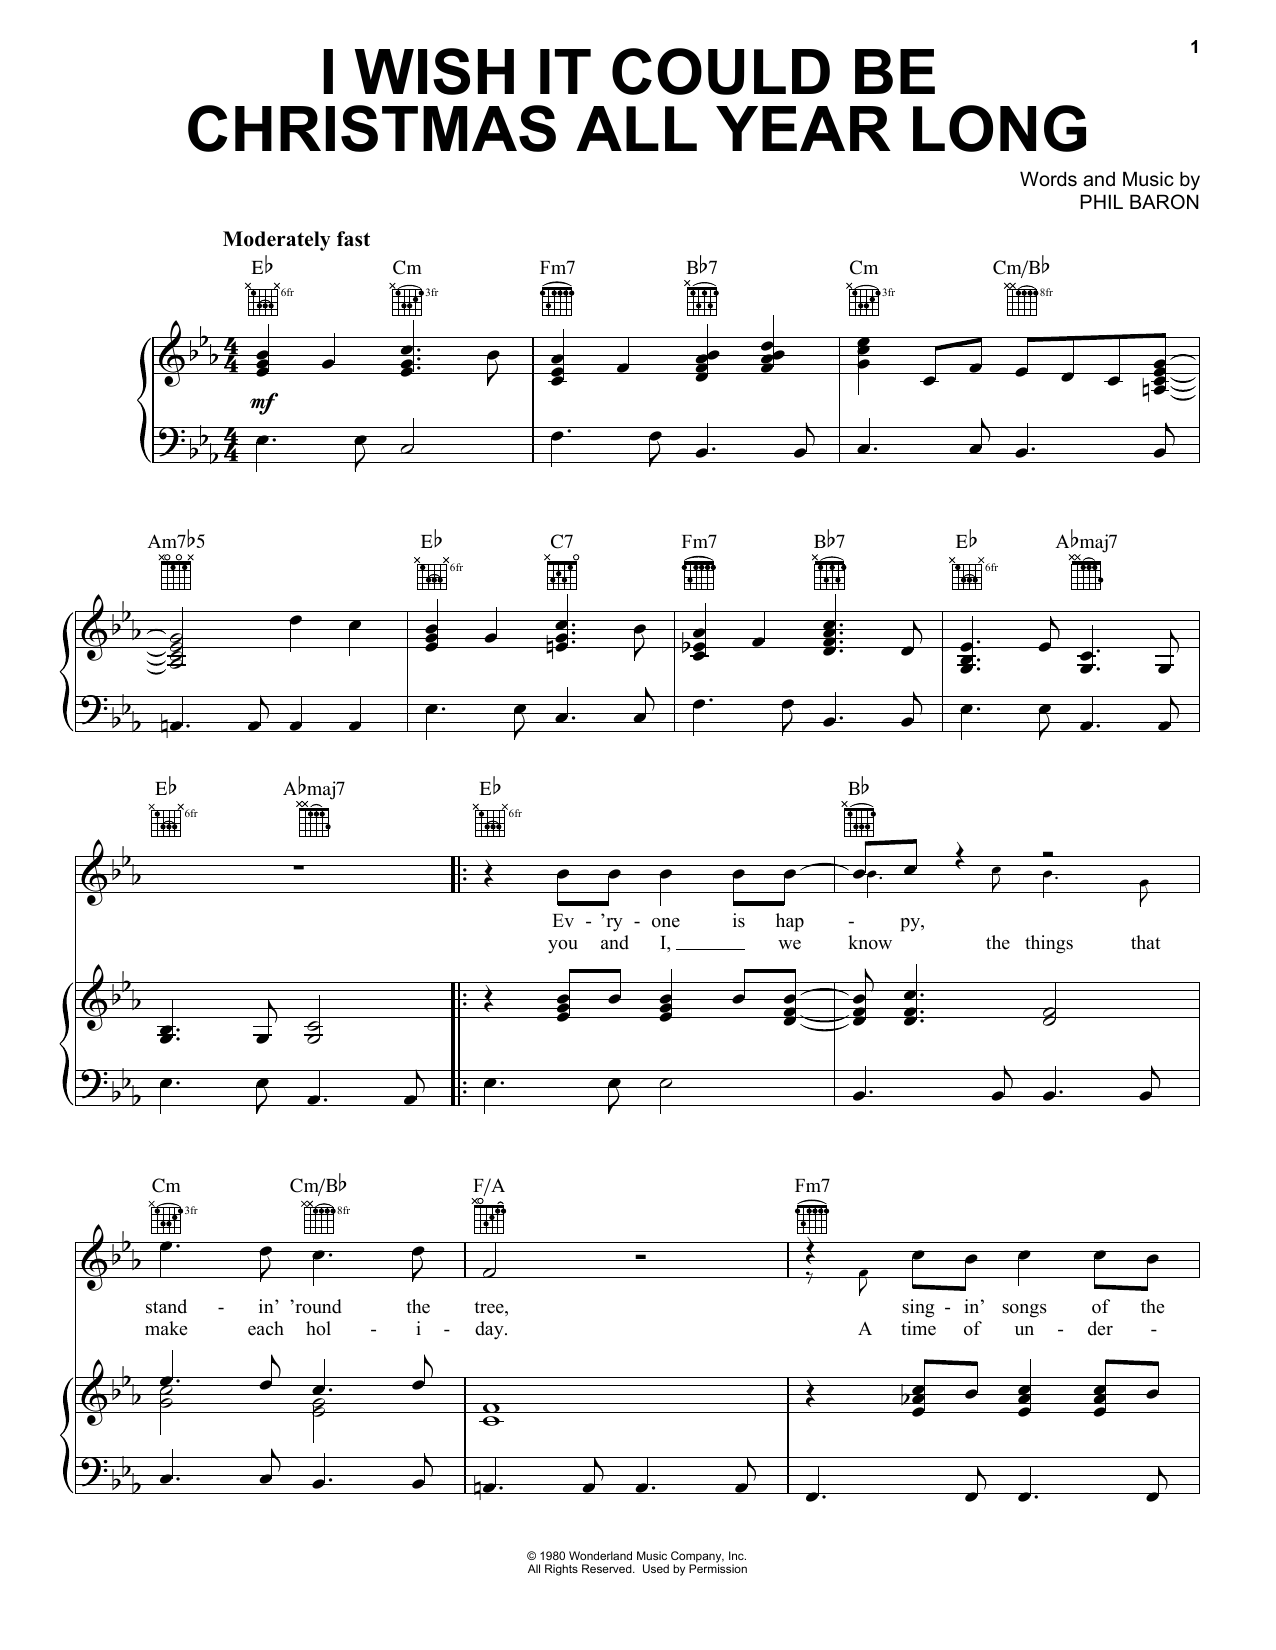 Download Phil Baron I Wish It Could Be Christmas All Year L Sheet Music